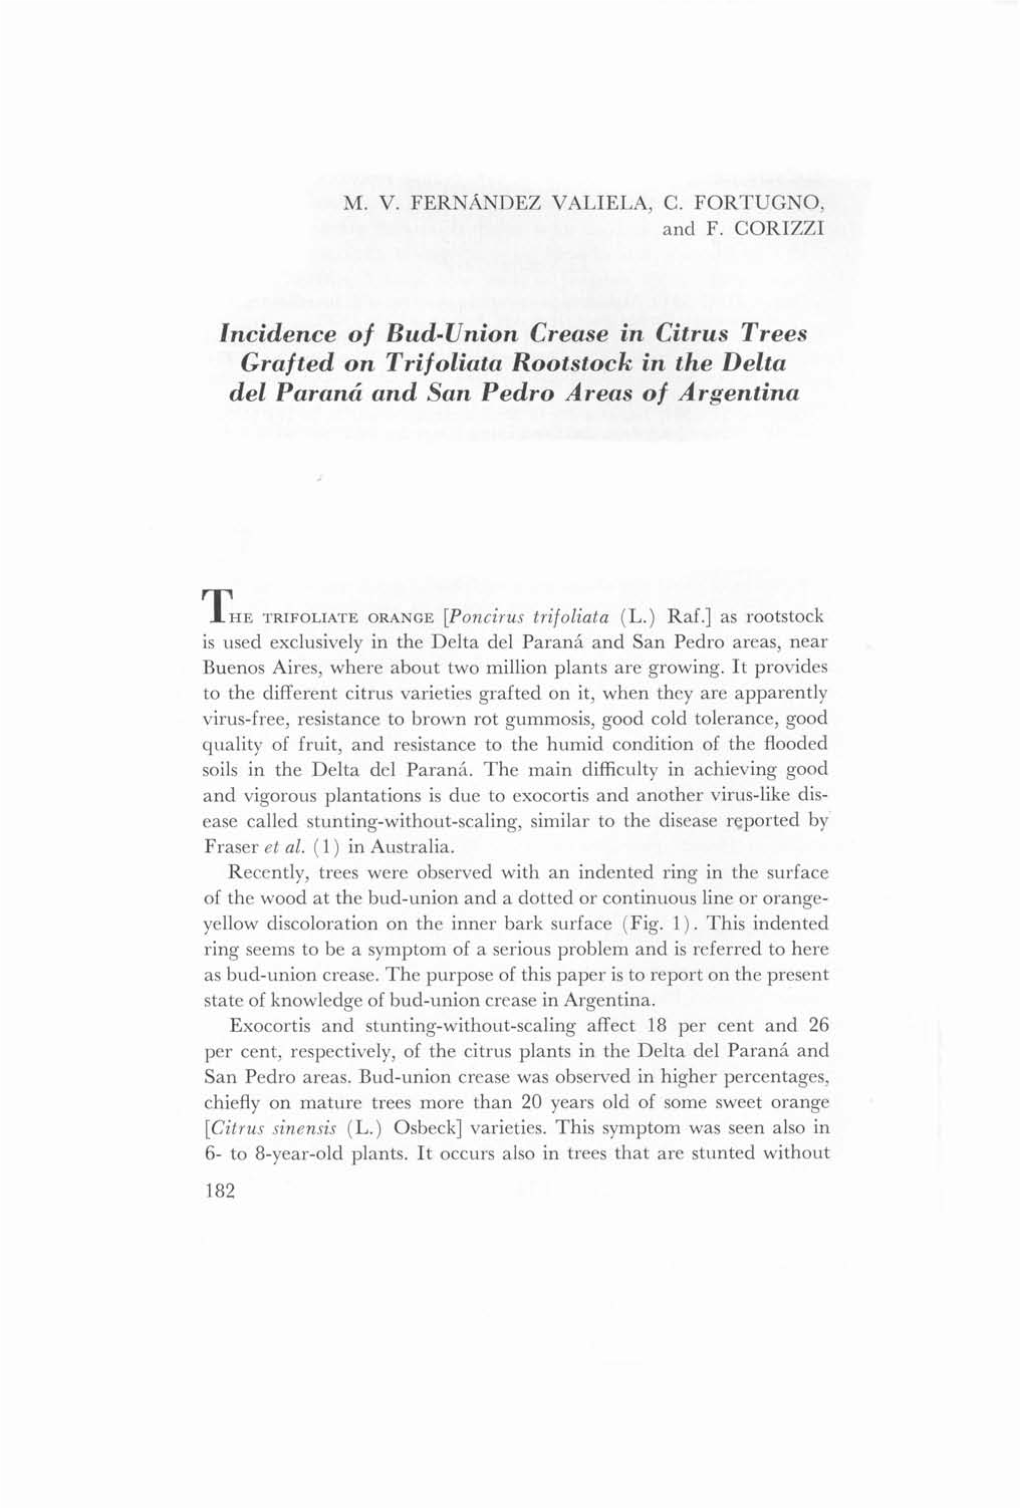 Incidence of Bud-Union Crease in Citrus Trees Grafted on Trifoliata Rootstock in the Delta Del Paranti and §An Pedro Areas of Argentina